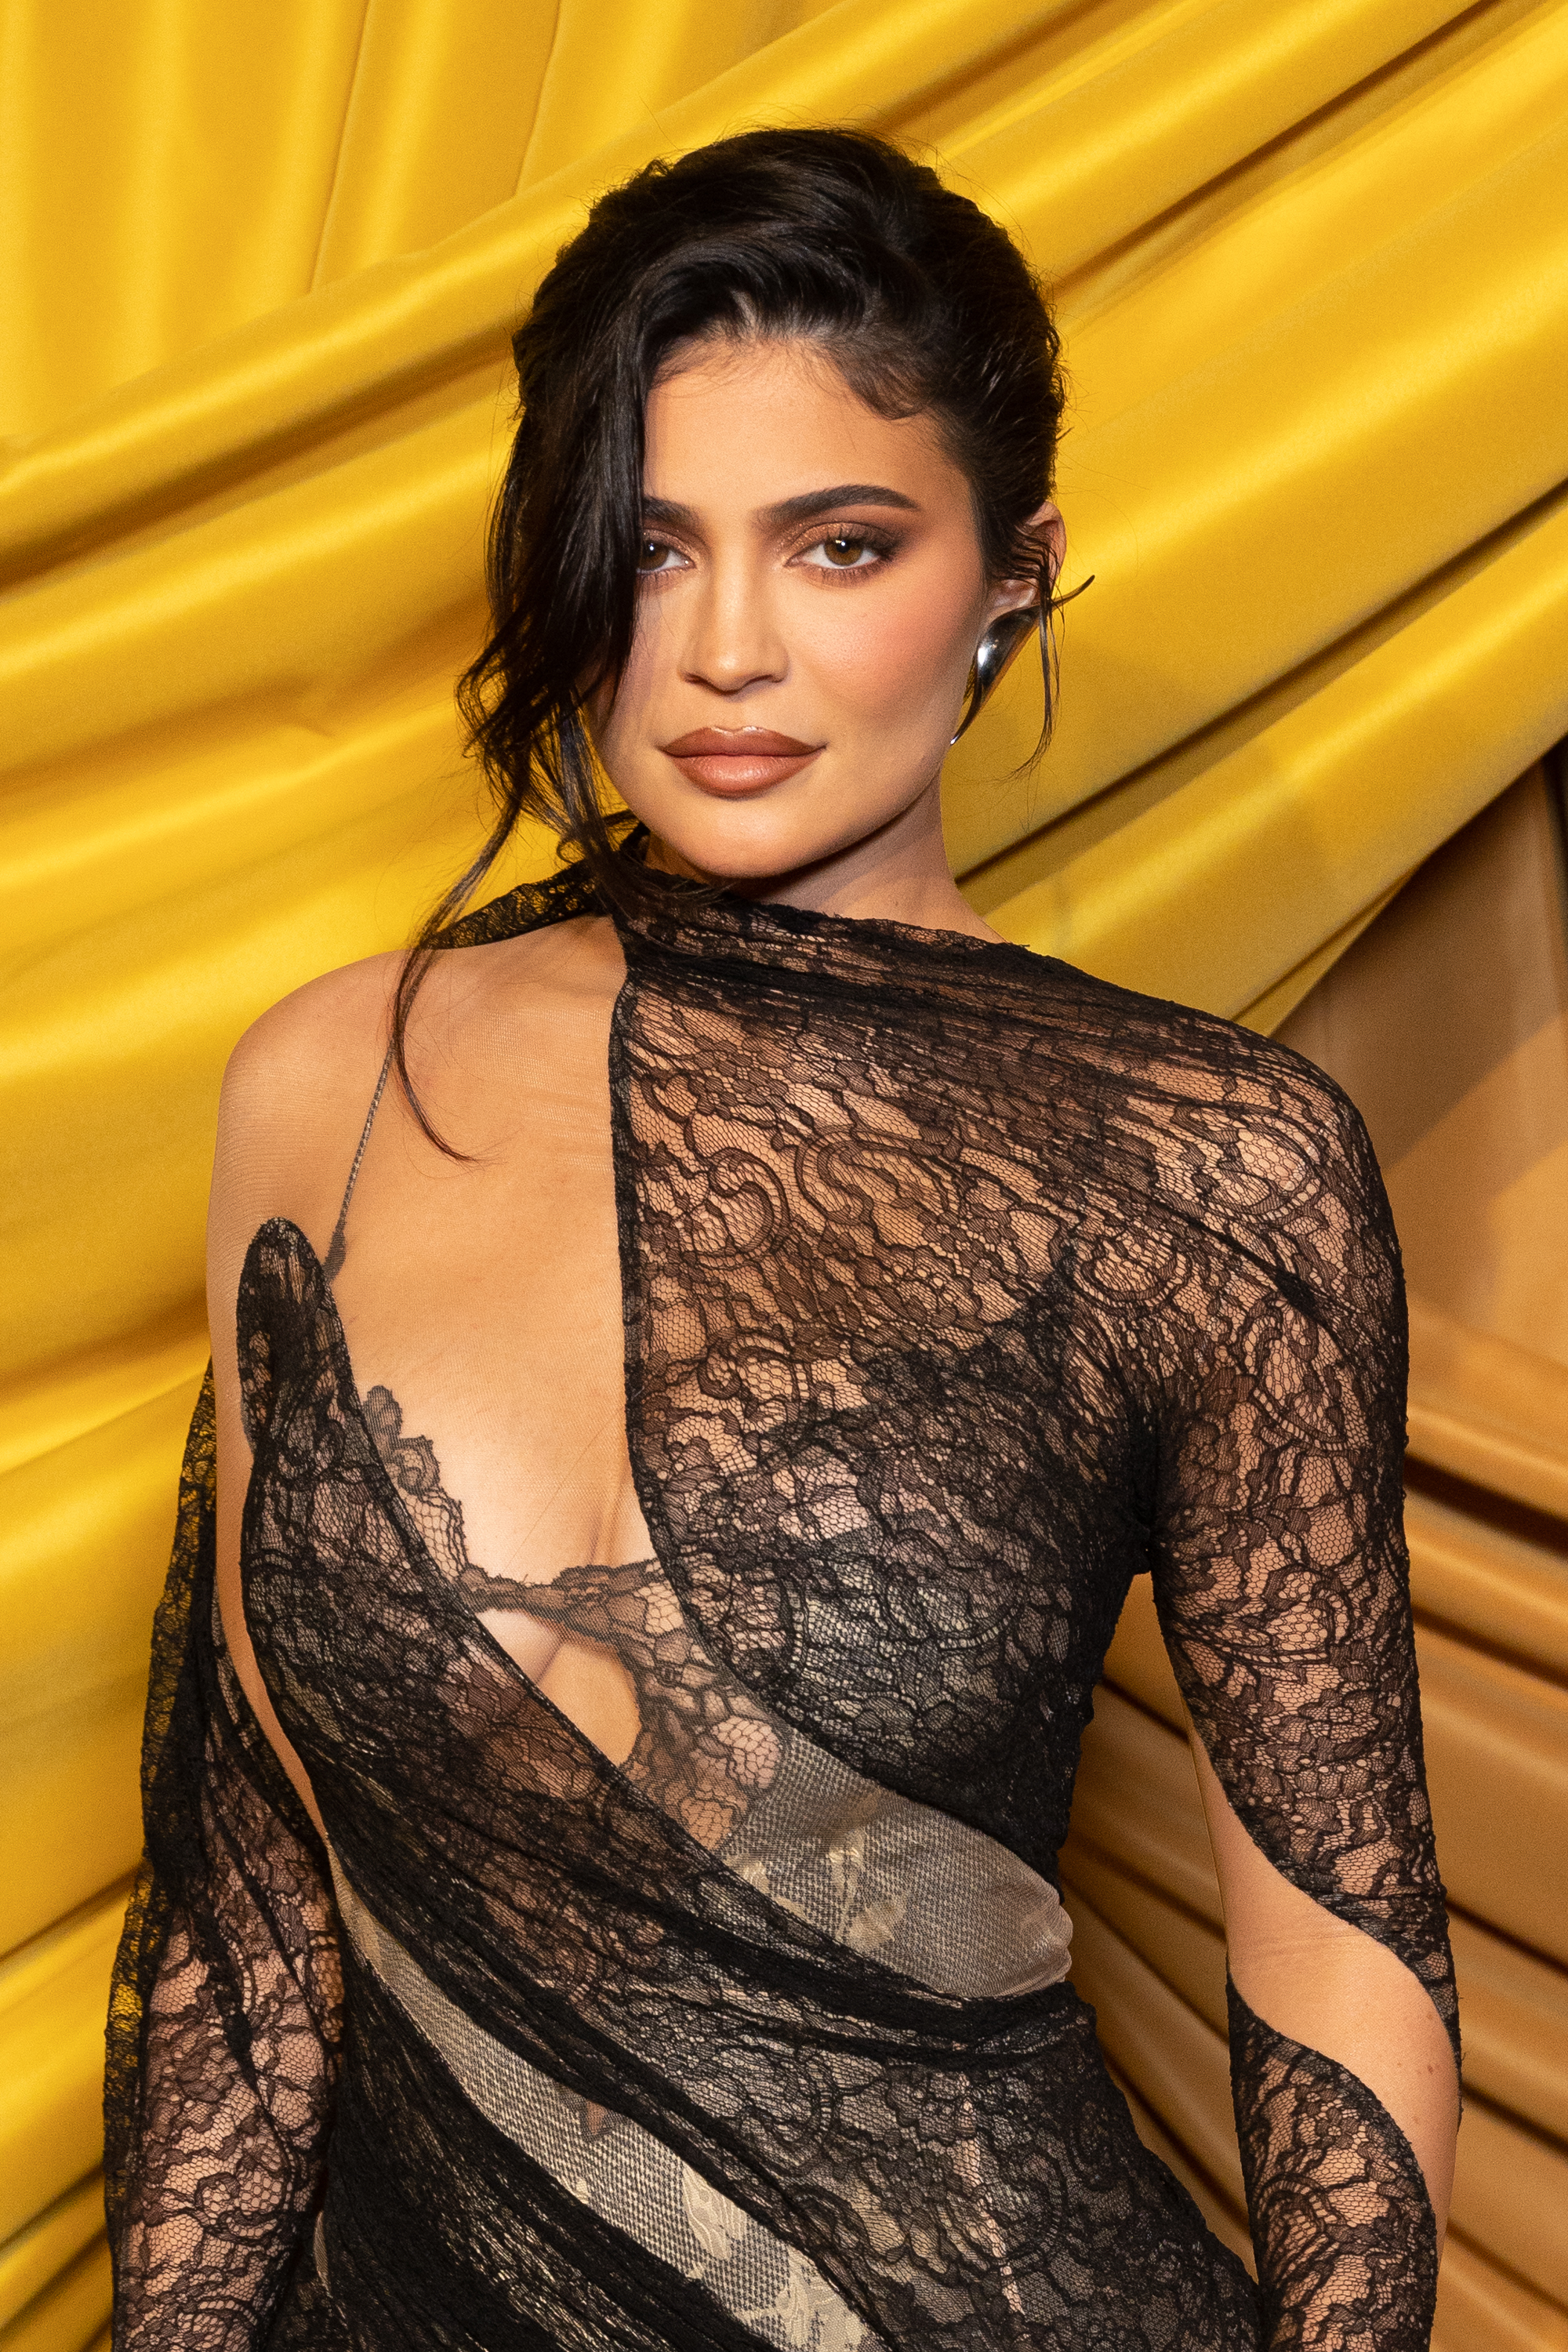 Close-up of Kylie at a media event in a swirling, lacy outfit